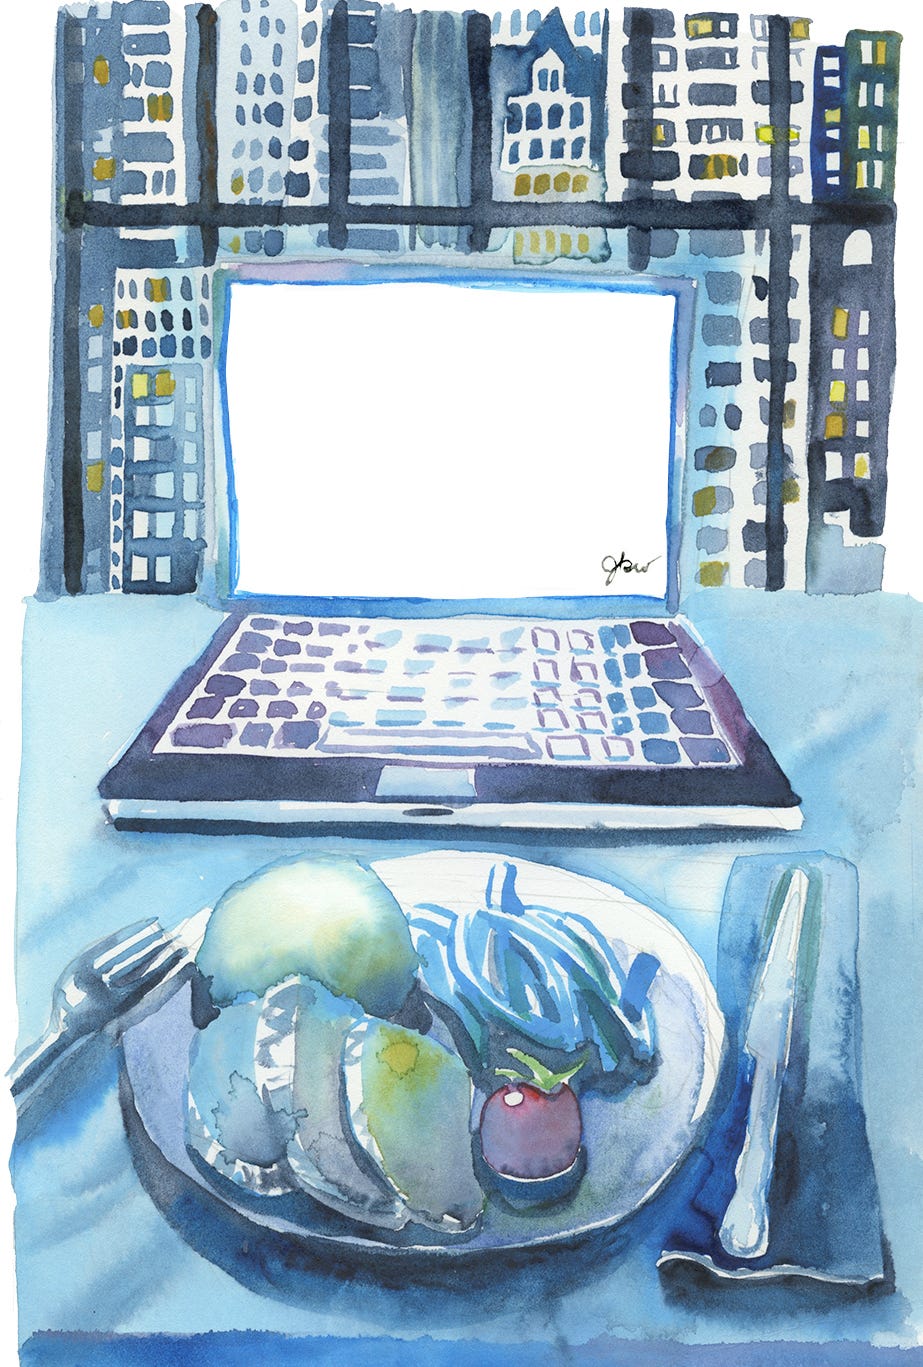 Illustration of a computer in the dark overlooking a New York City skyline